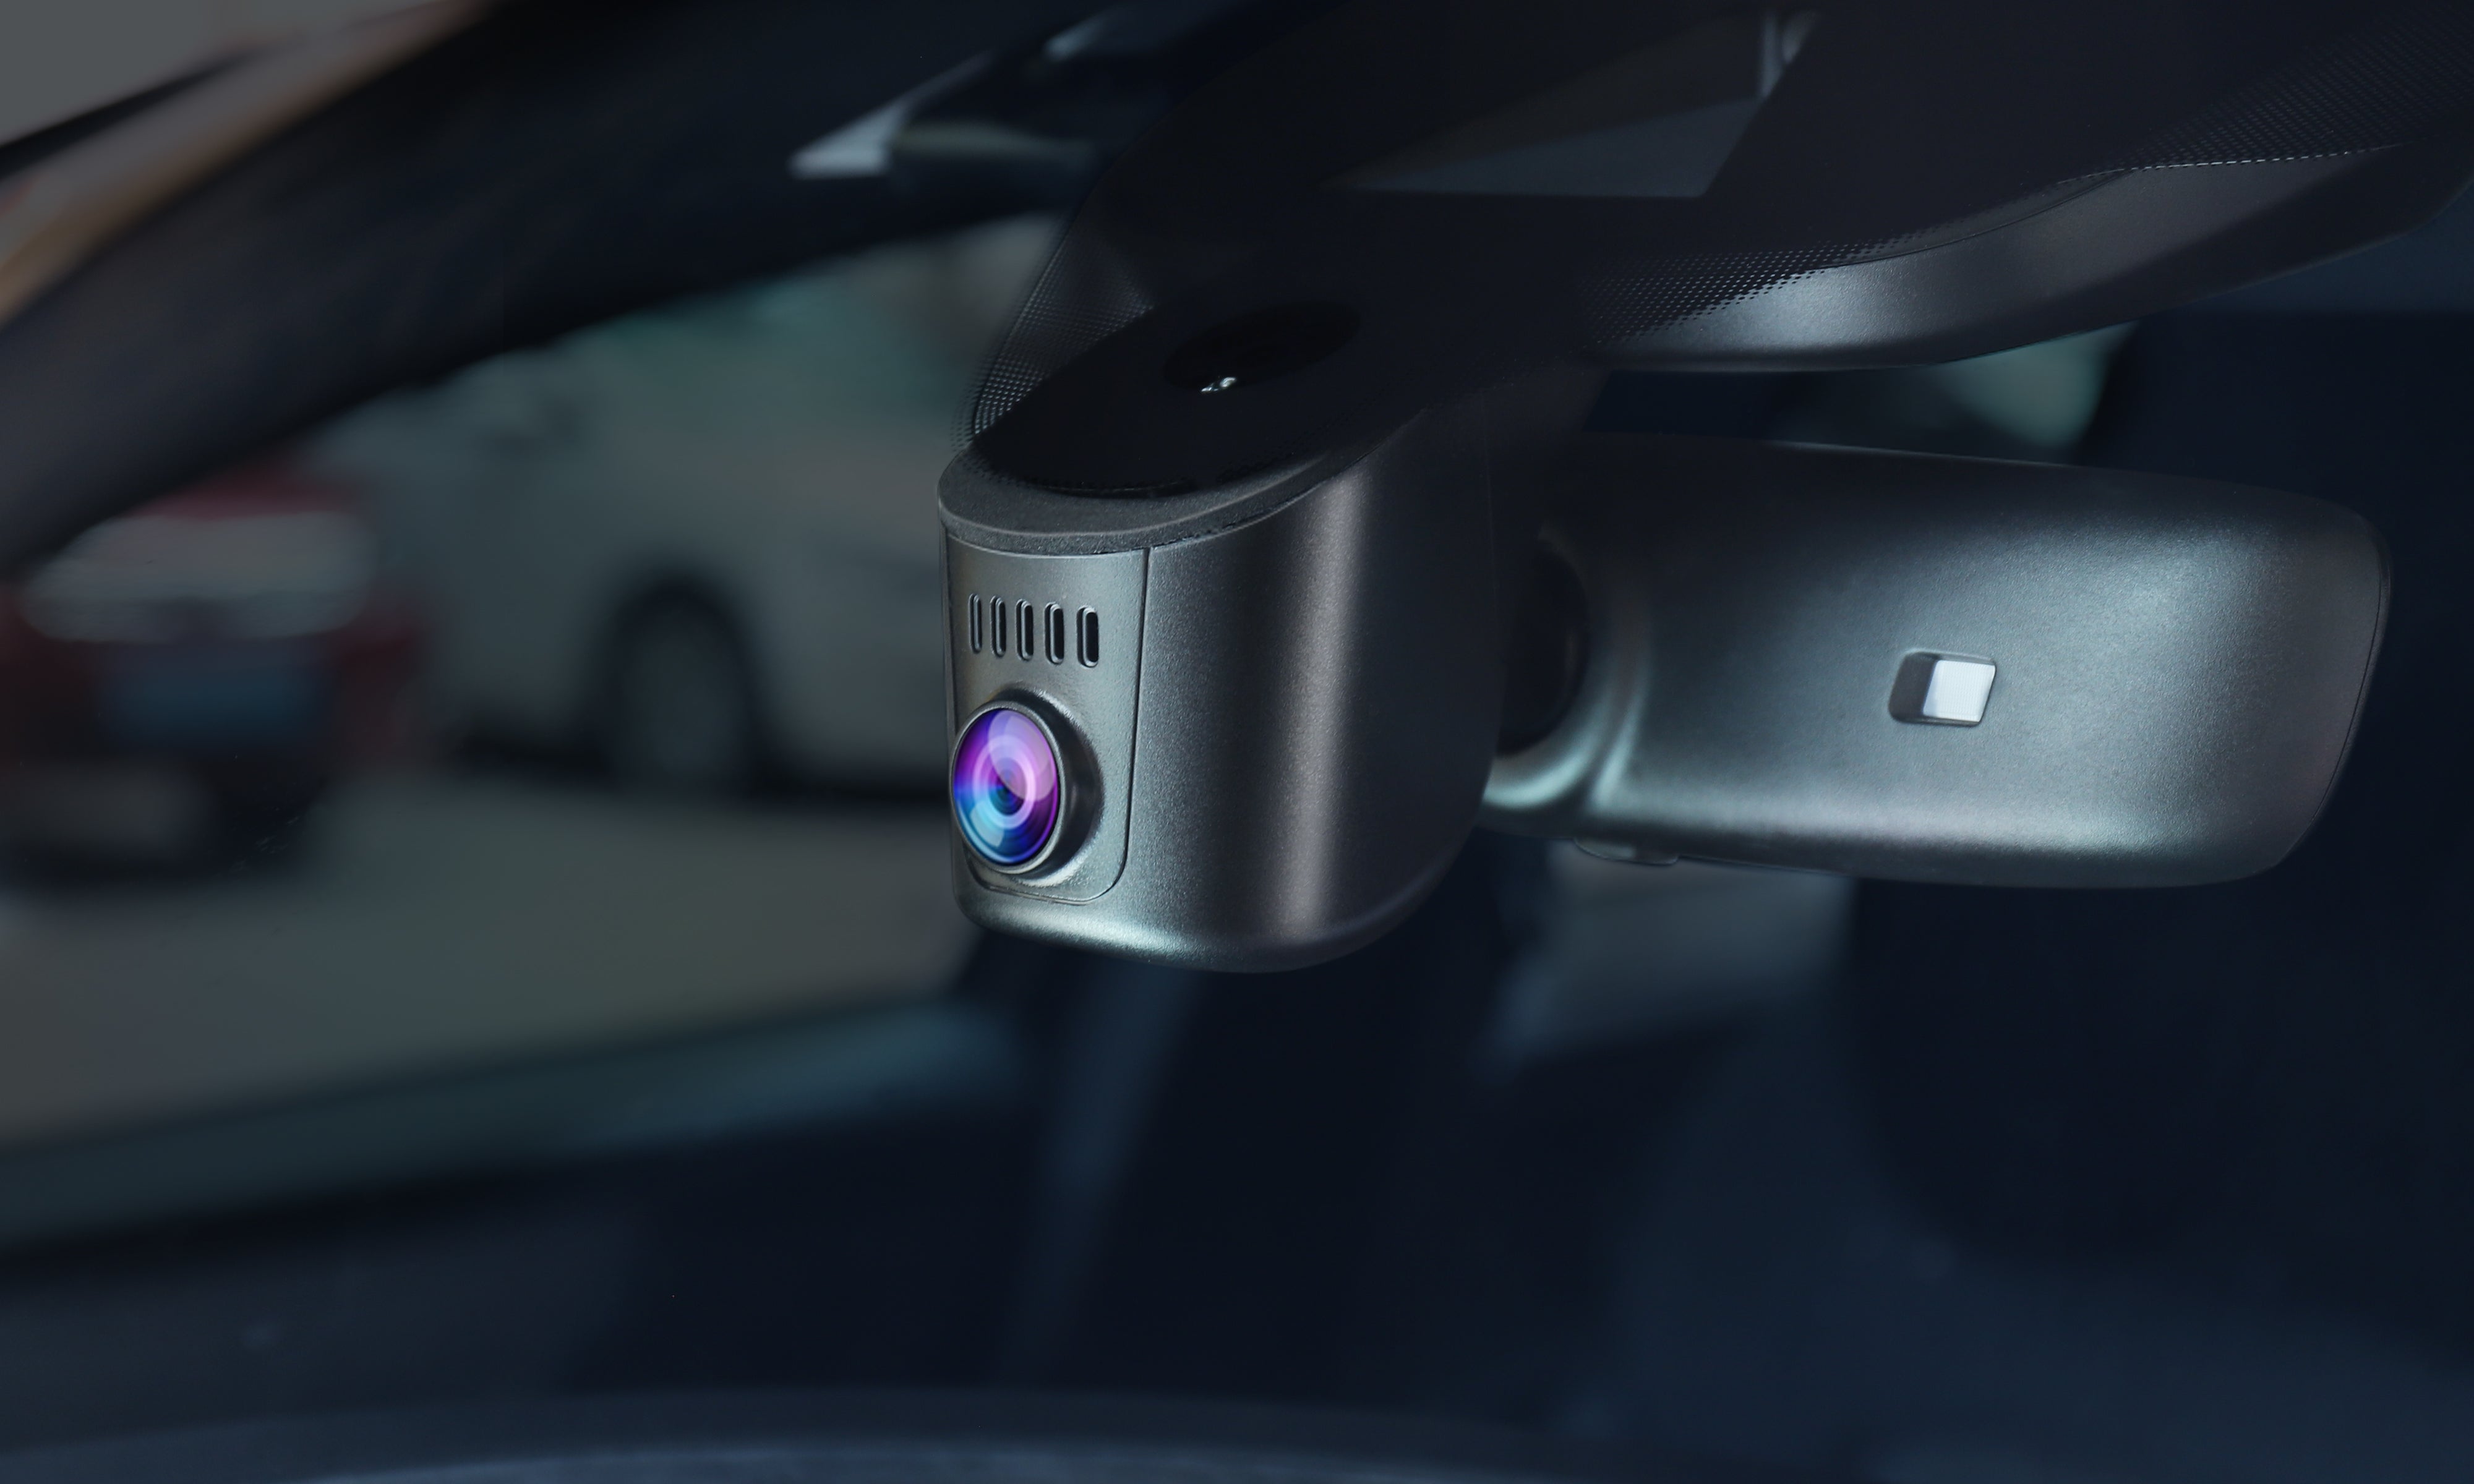 Your Boss Put a Dash Cam in your Vehicle. Now what?